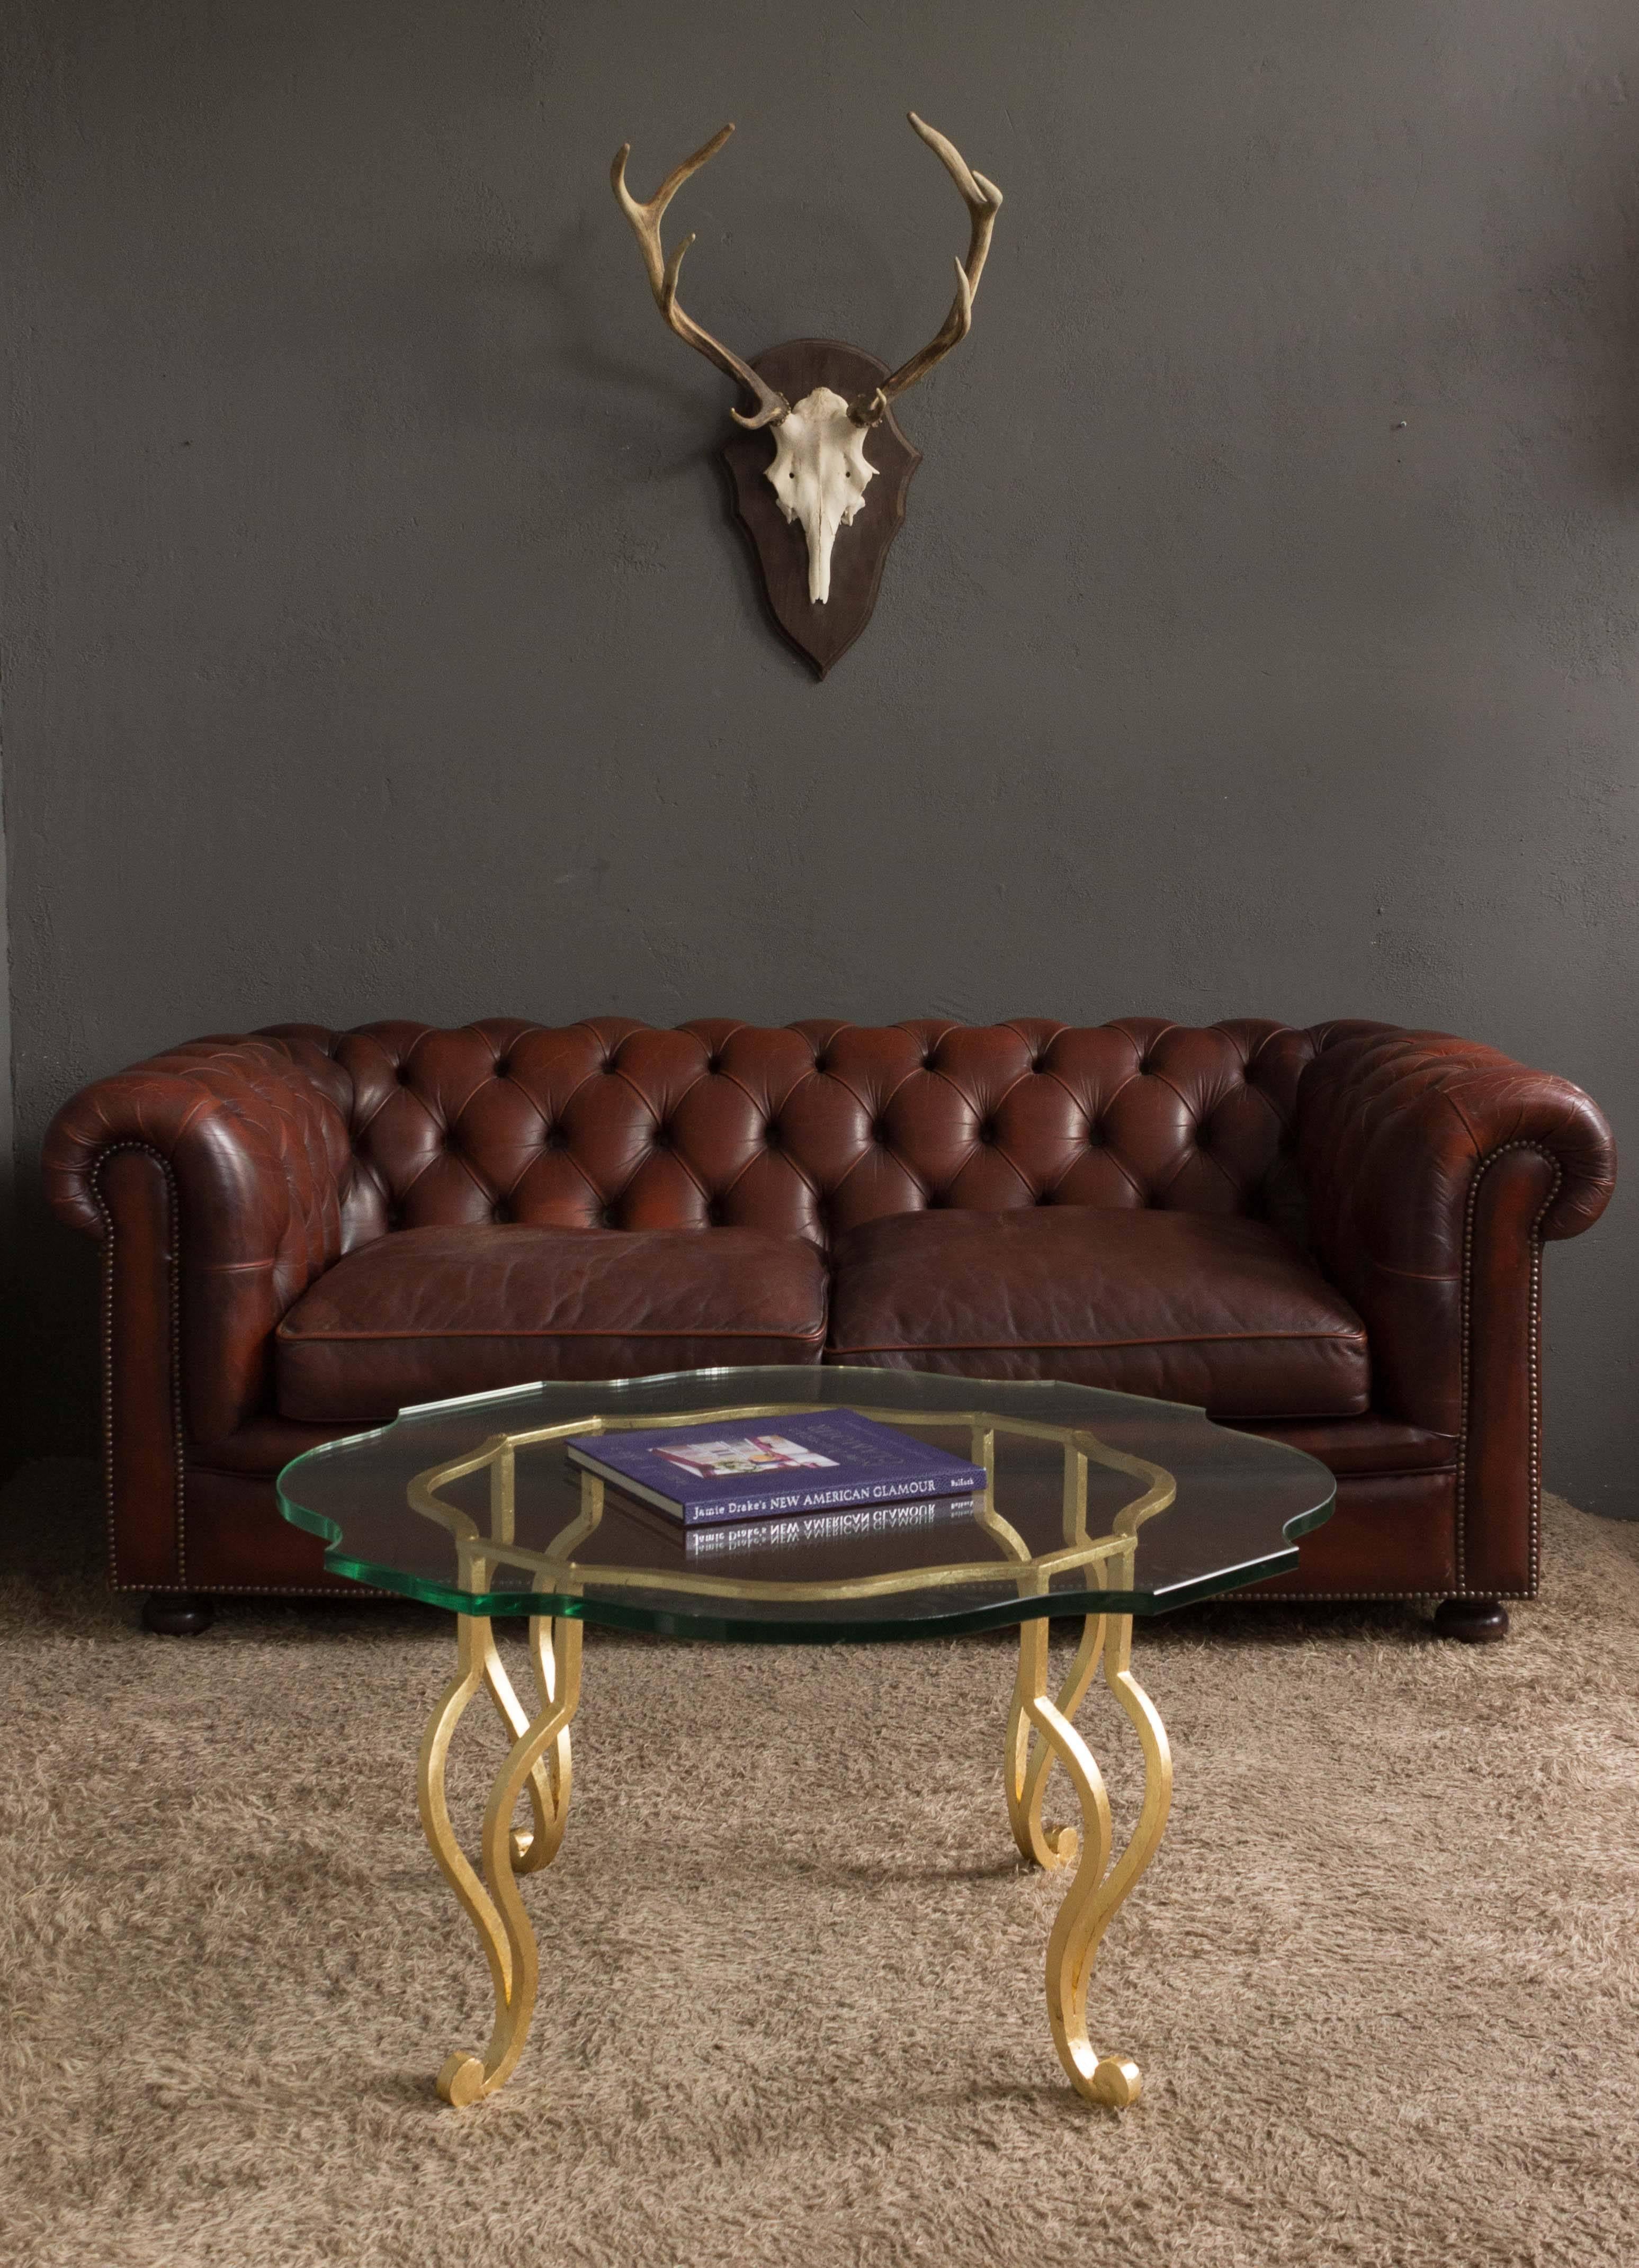 A stunning Italian 1940s gilt iron coffee table with a custom clear glass surface. Add a touch of luxury to your living room with this ornate Italian gilt iron coffee table from the 1940s. The intricate details and the gilt finish give this table an